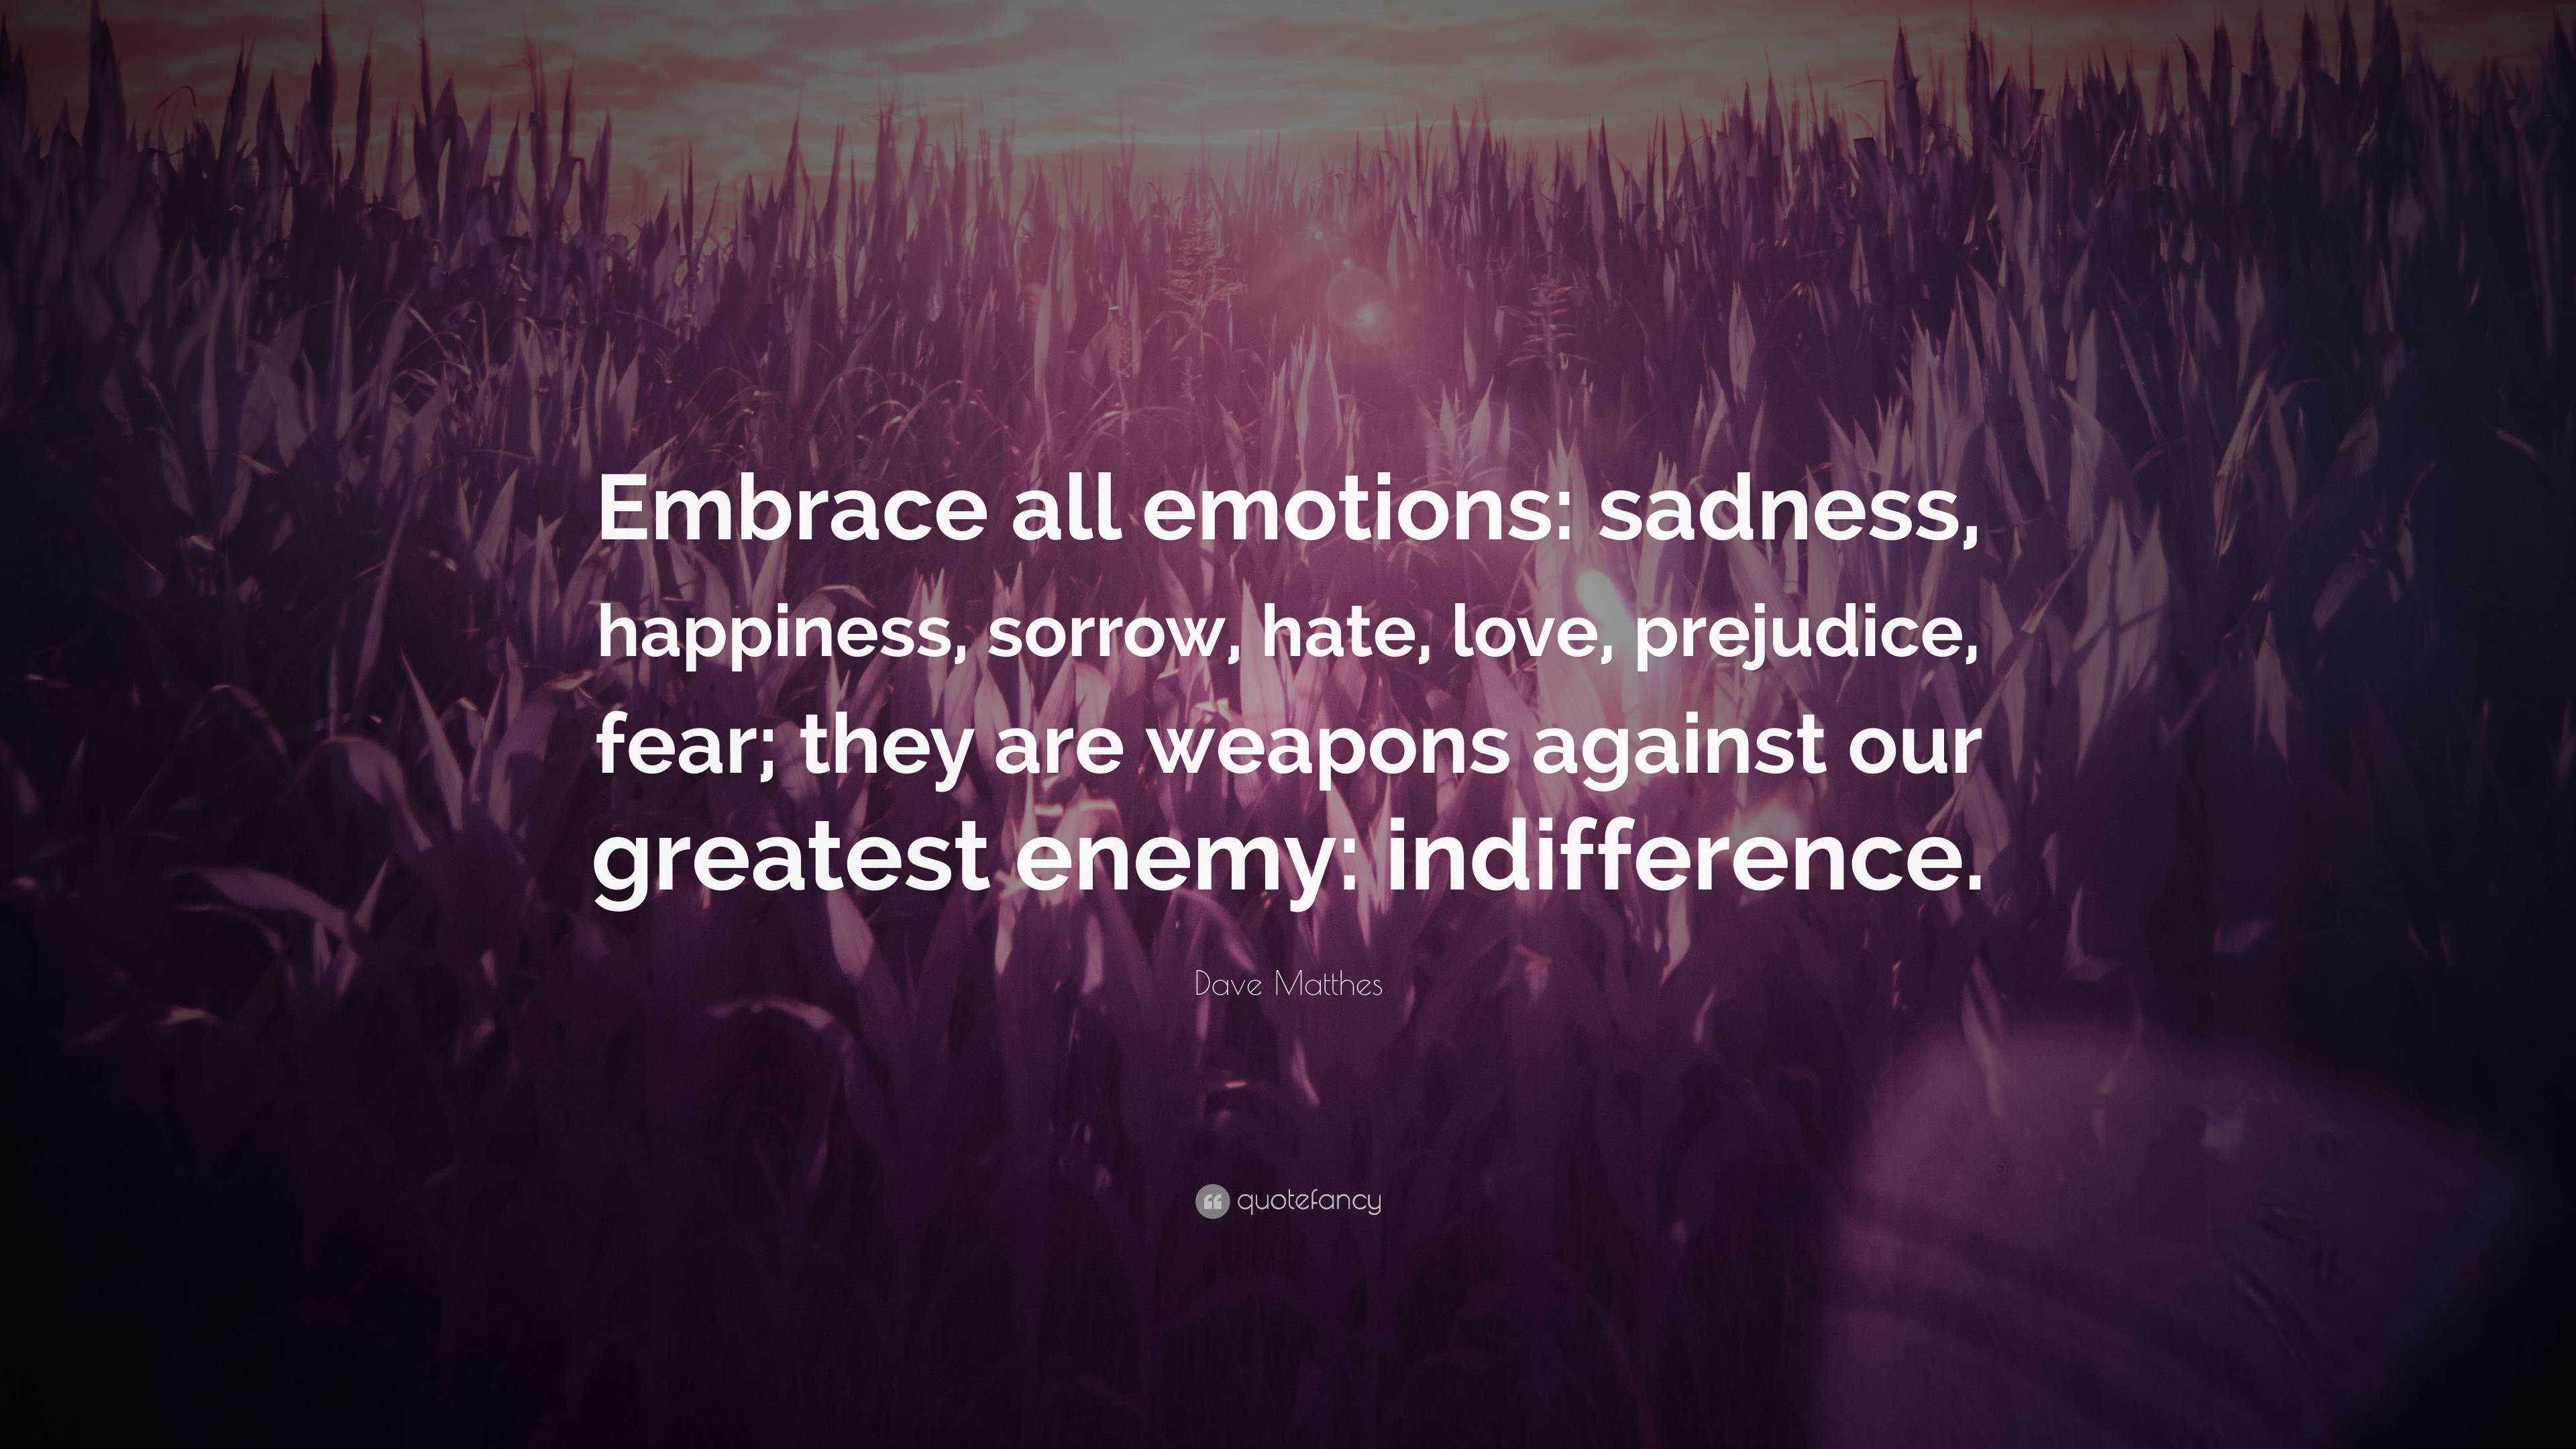 Dave Matthes Quote: “Embrace all emotions: sadness, happiness